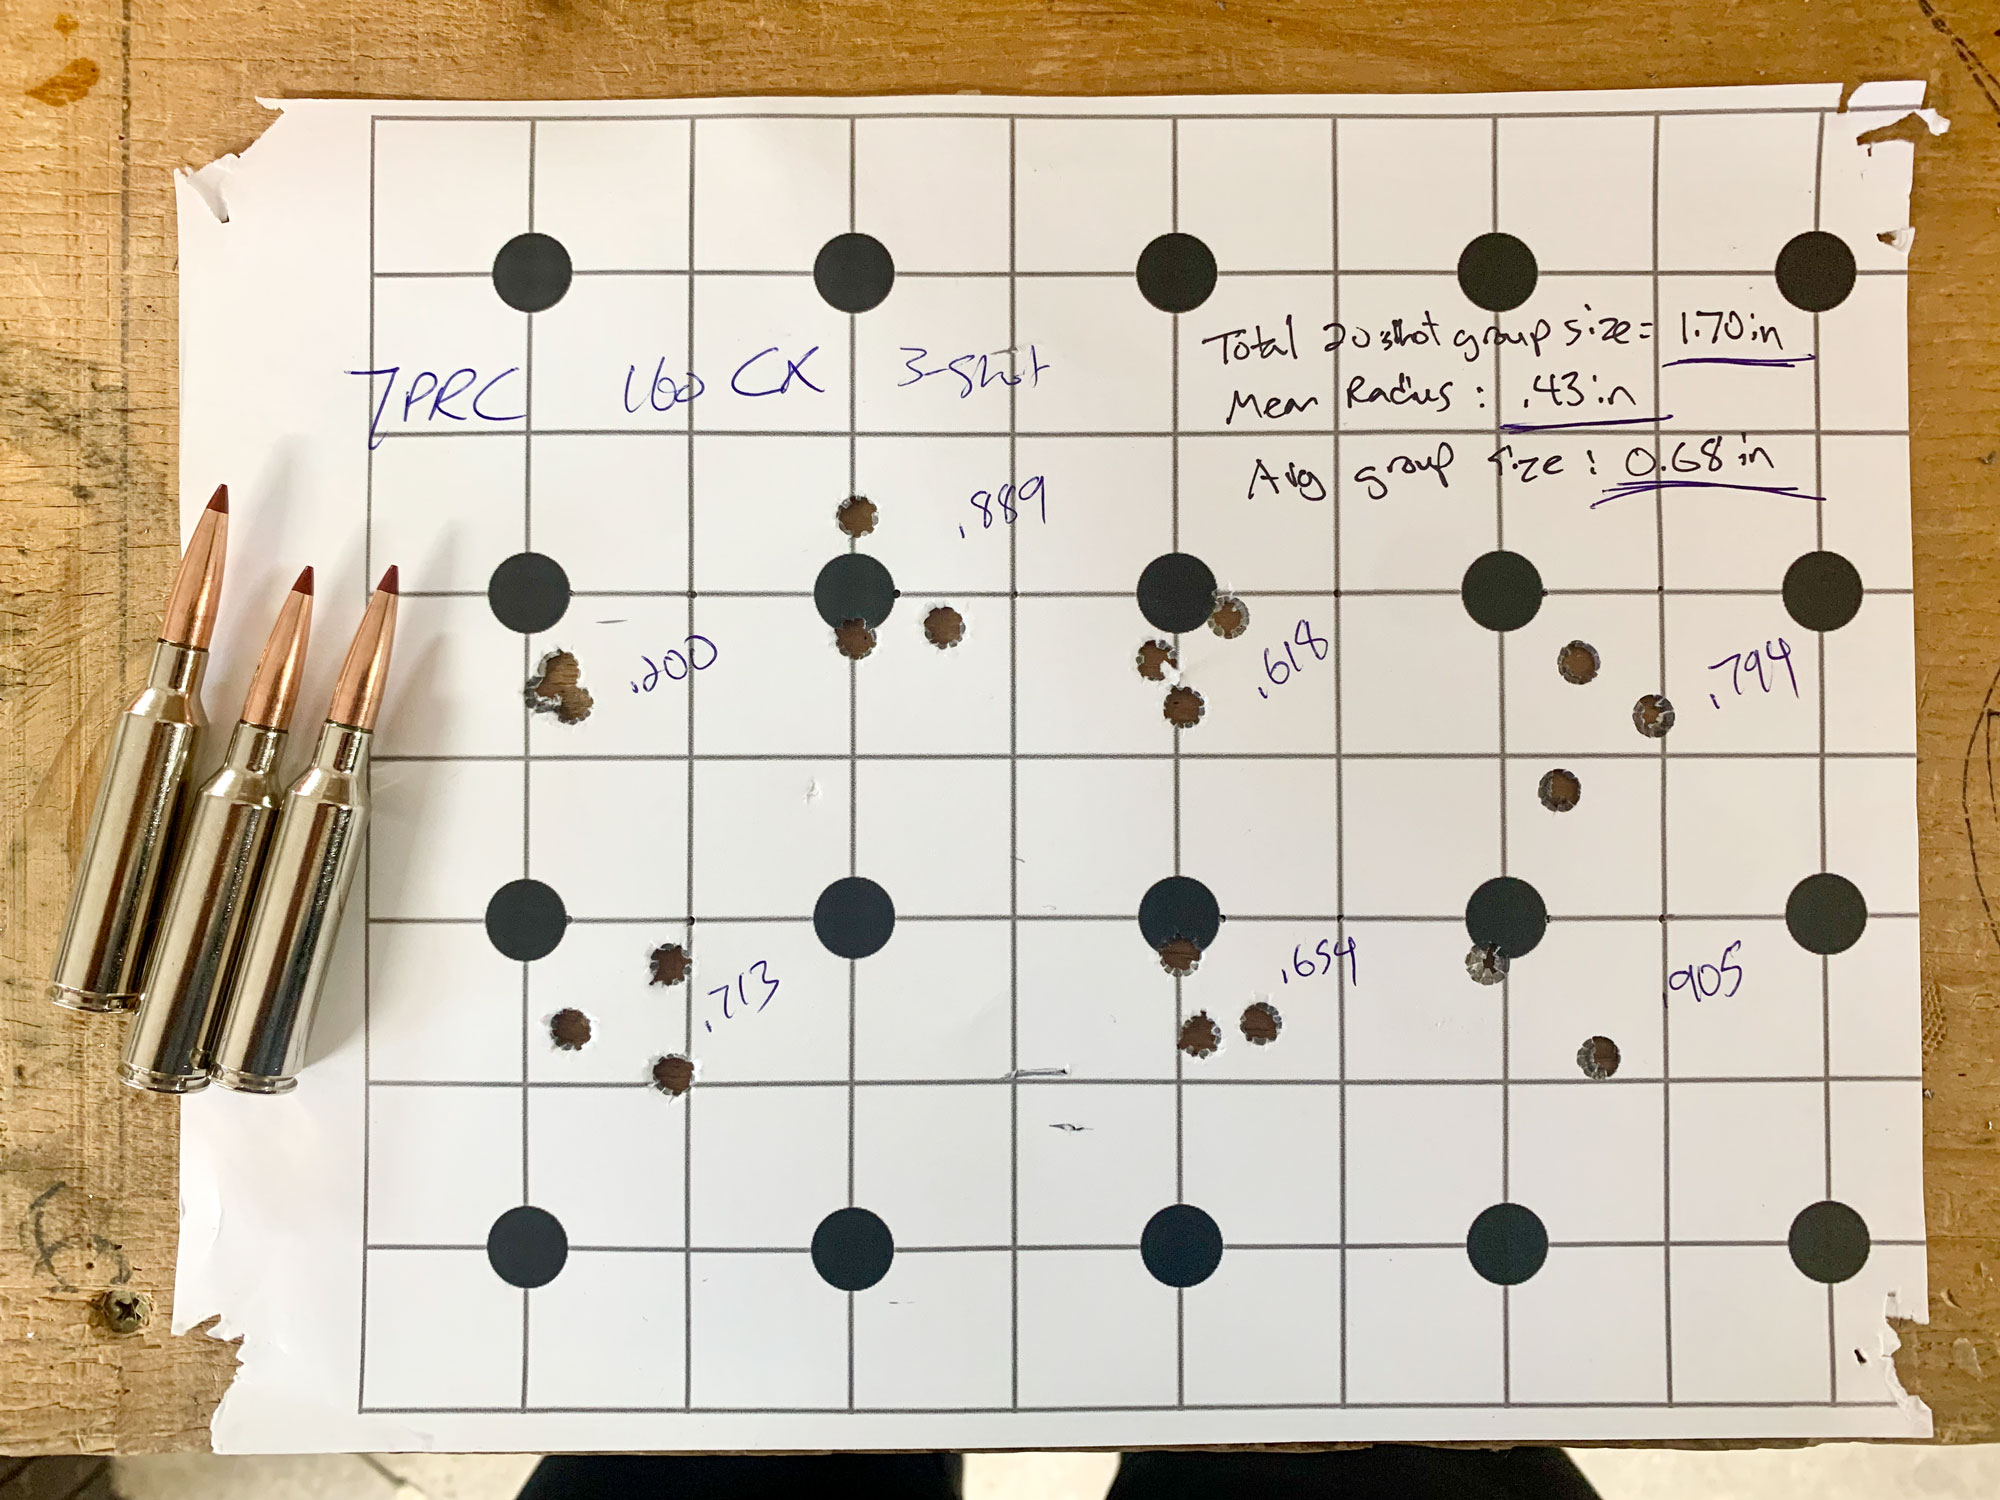 7mm PRC groups from springfield 2020 waypoint long action